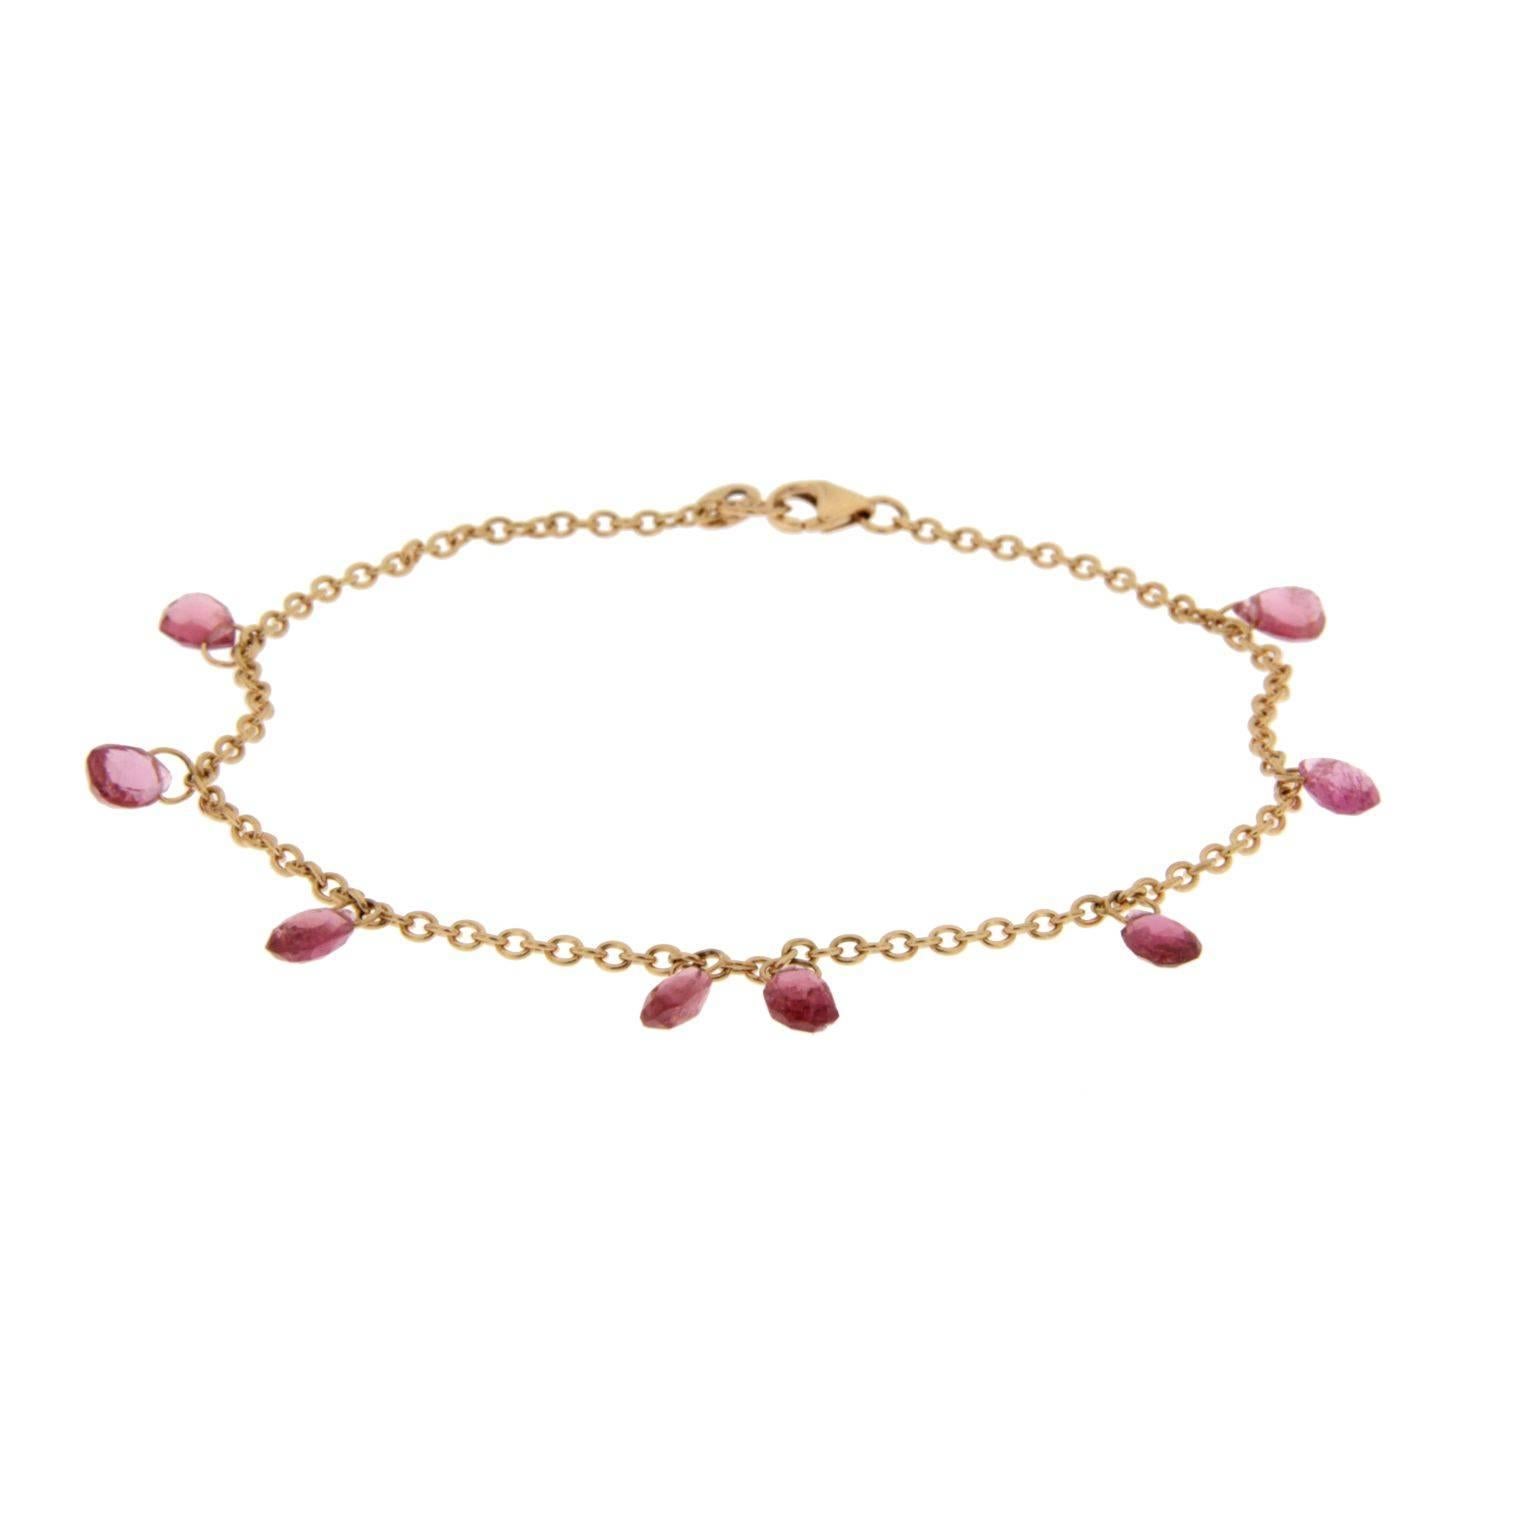 Jona design collection, hand crafted in Italy, 18 karat rose gold chain bracelet, featuring 3.40 carats of briolette cut pink tourmaline drops. Total length: 7.5 in. -18cm. 
All Jona jewelry is new and has never been previously owned or worn.